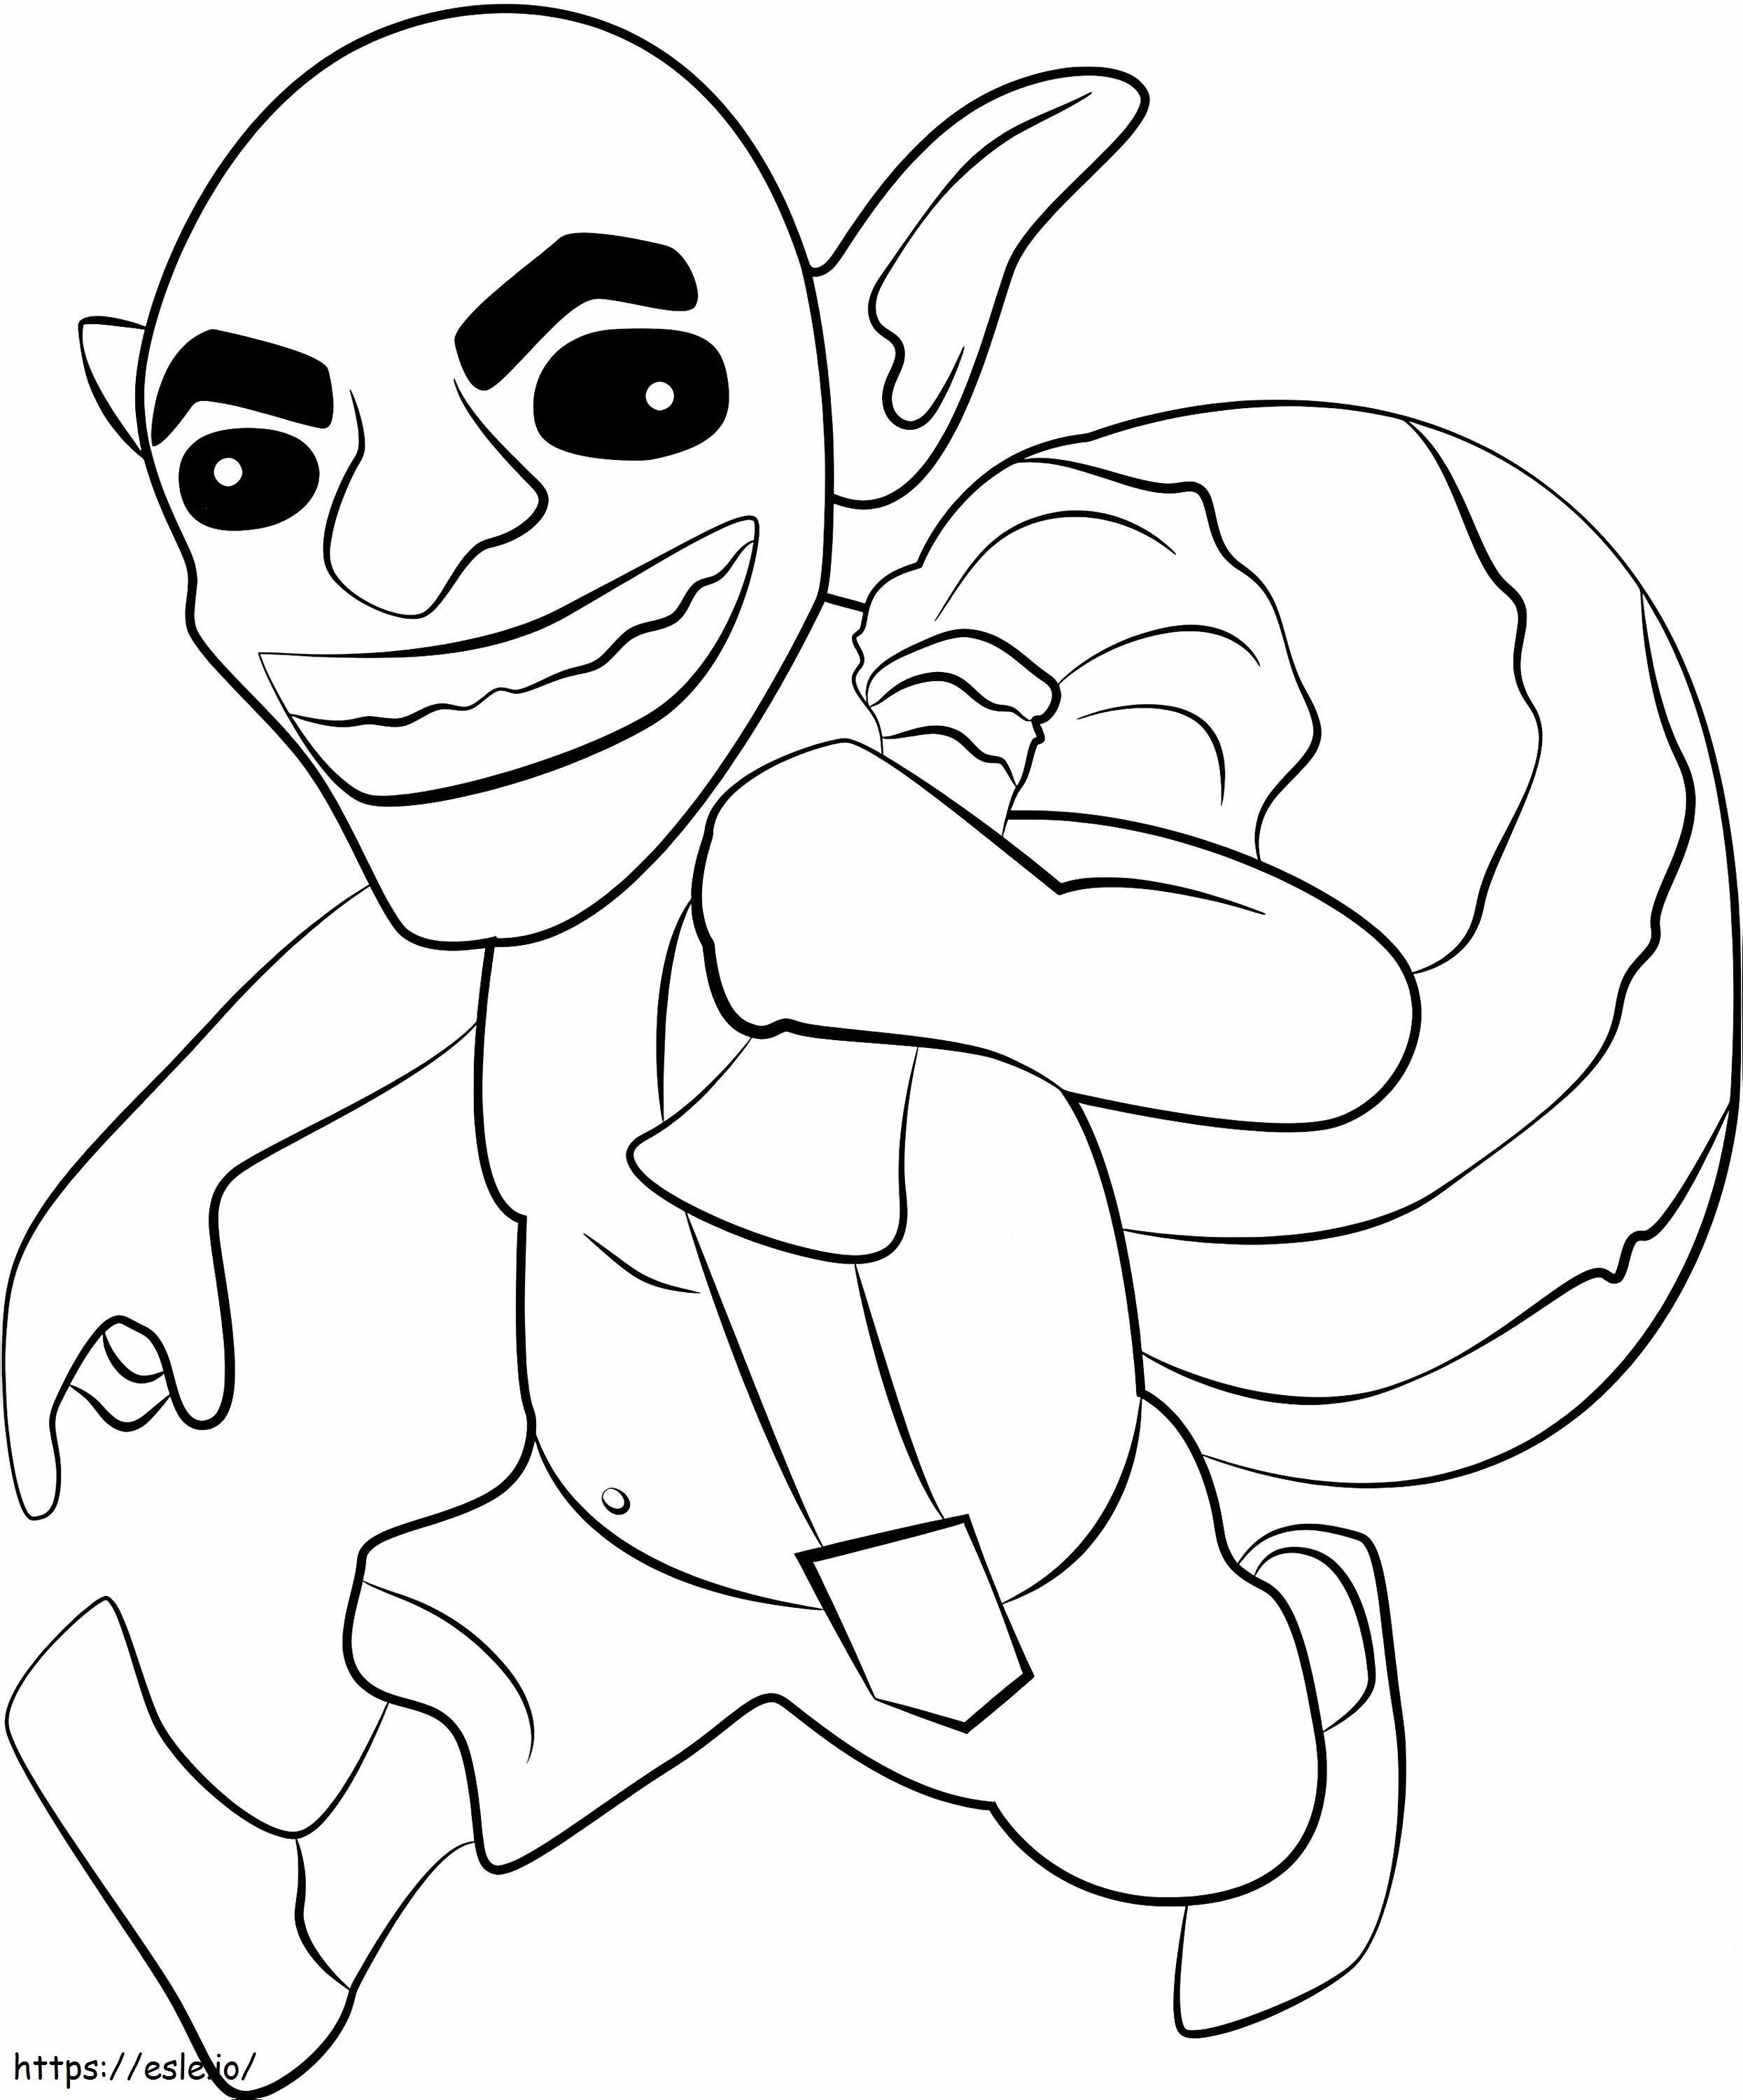 Goblin Walking A4 coloring page